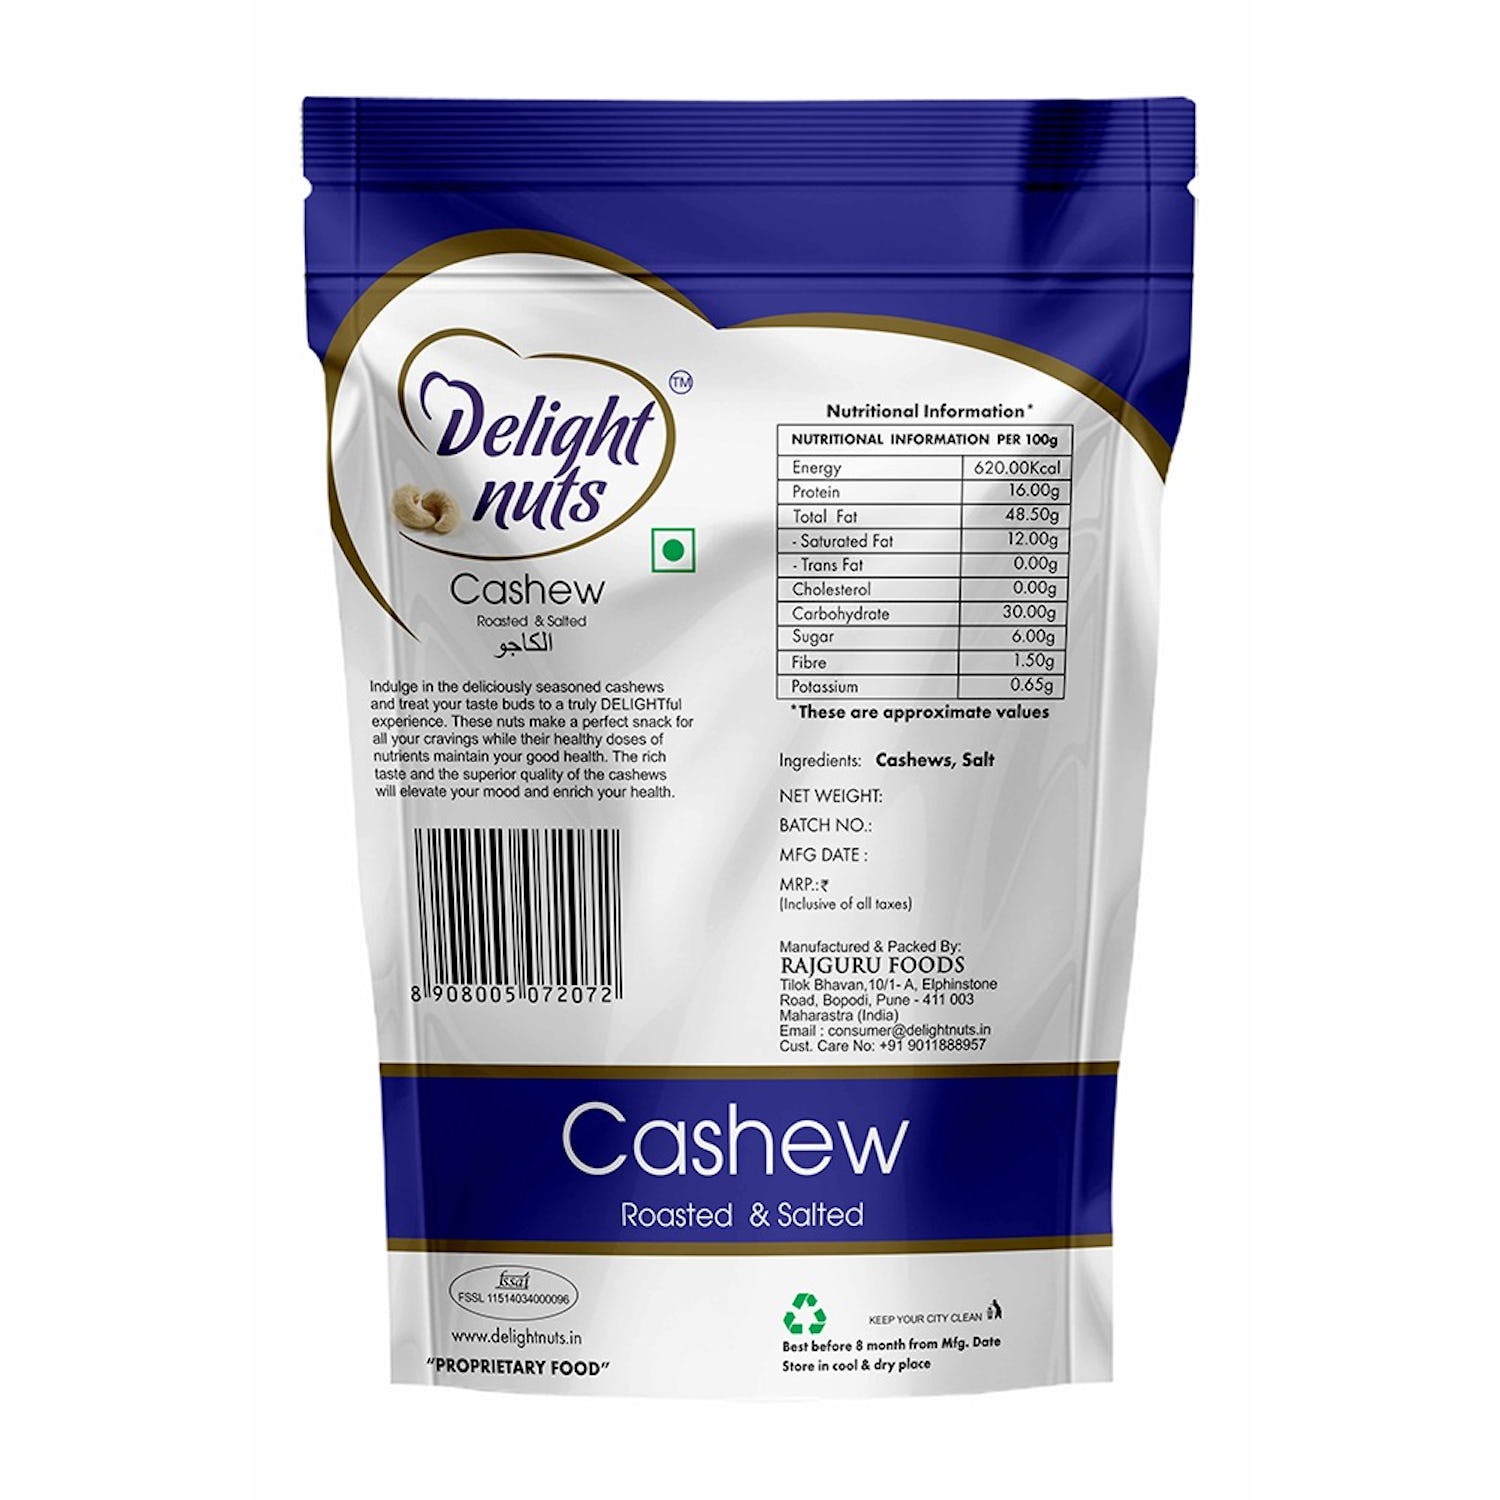 Delight Nuts Cashew Roasted & Salted, 200g